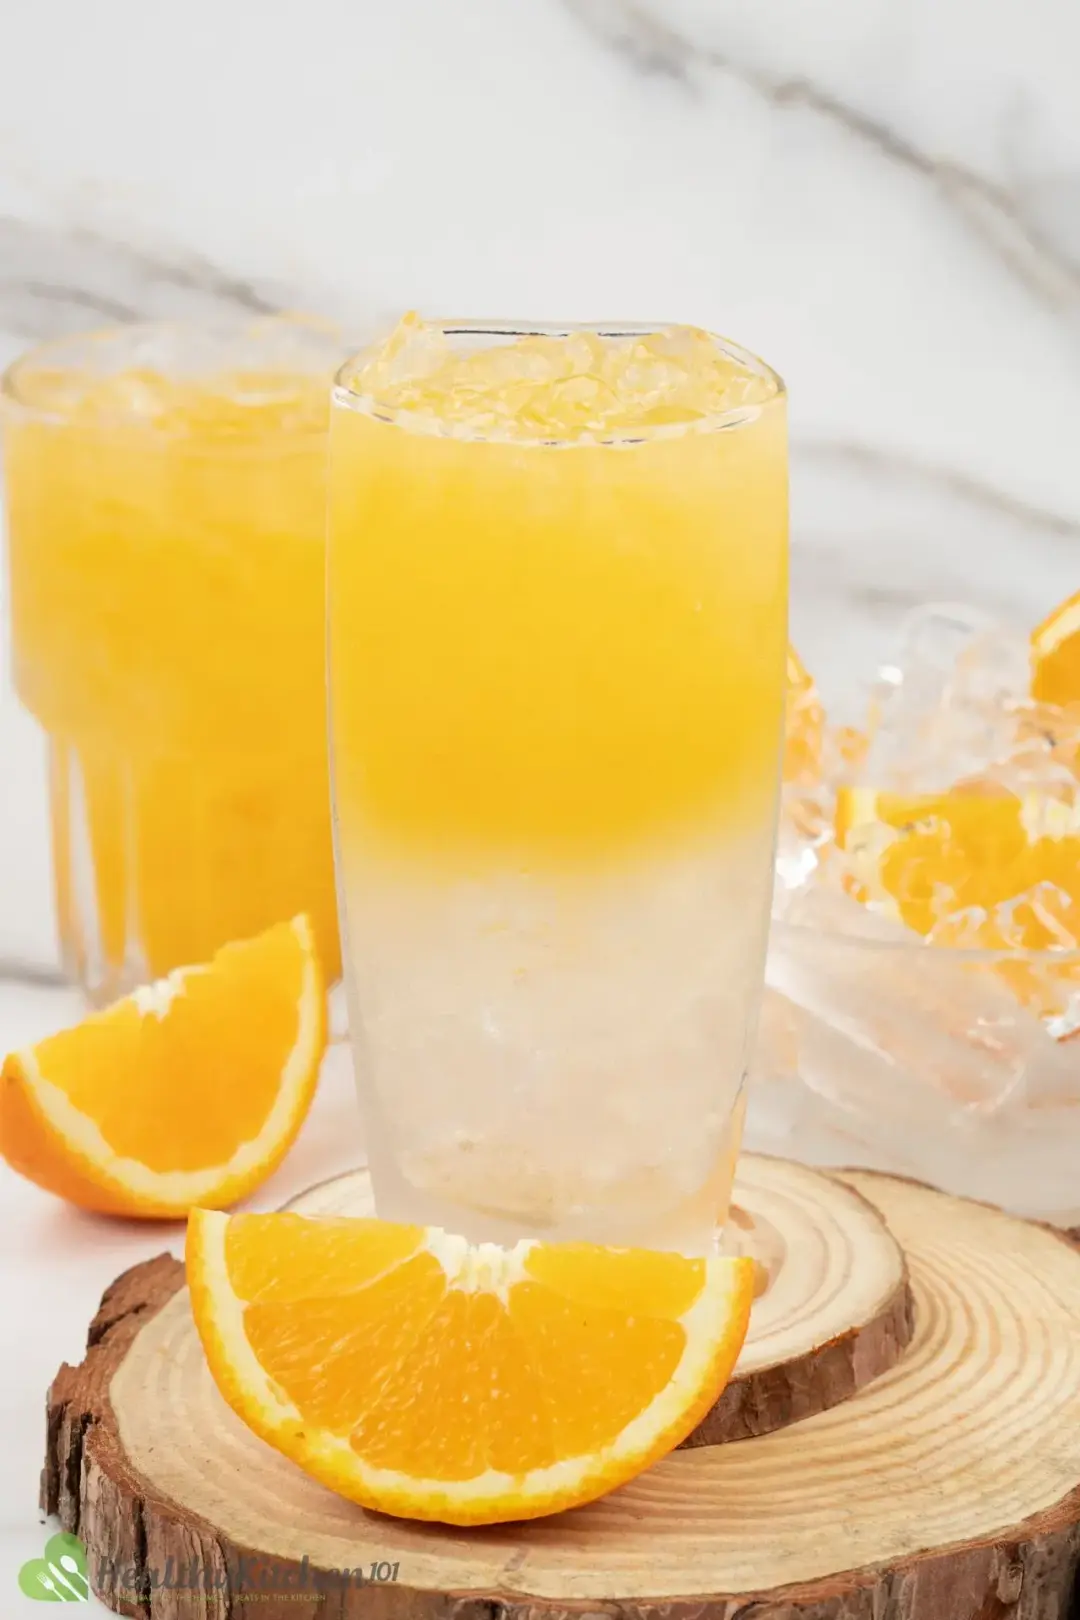 A glass of orange juice, vodka, and sugar syrup in 2 layers, next to orange wedges and an orange juice glass